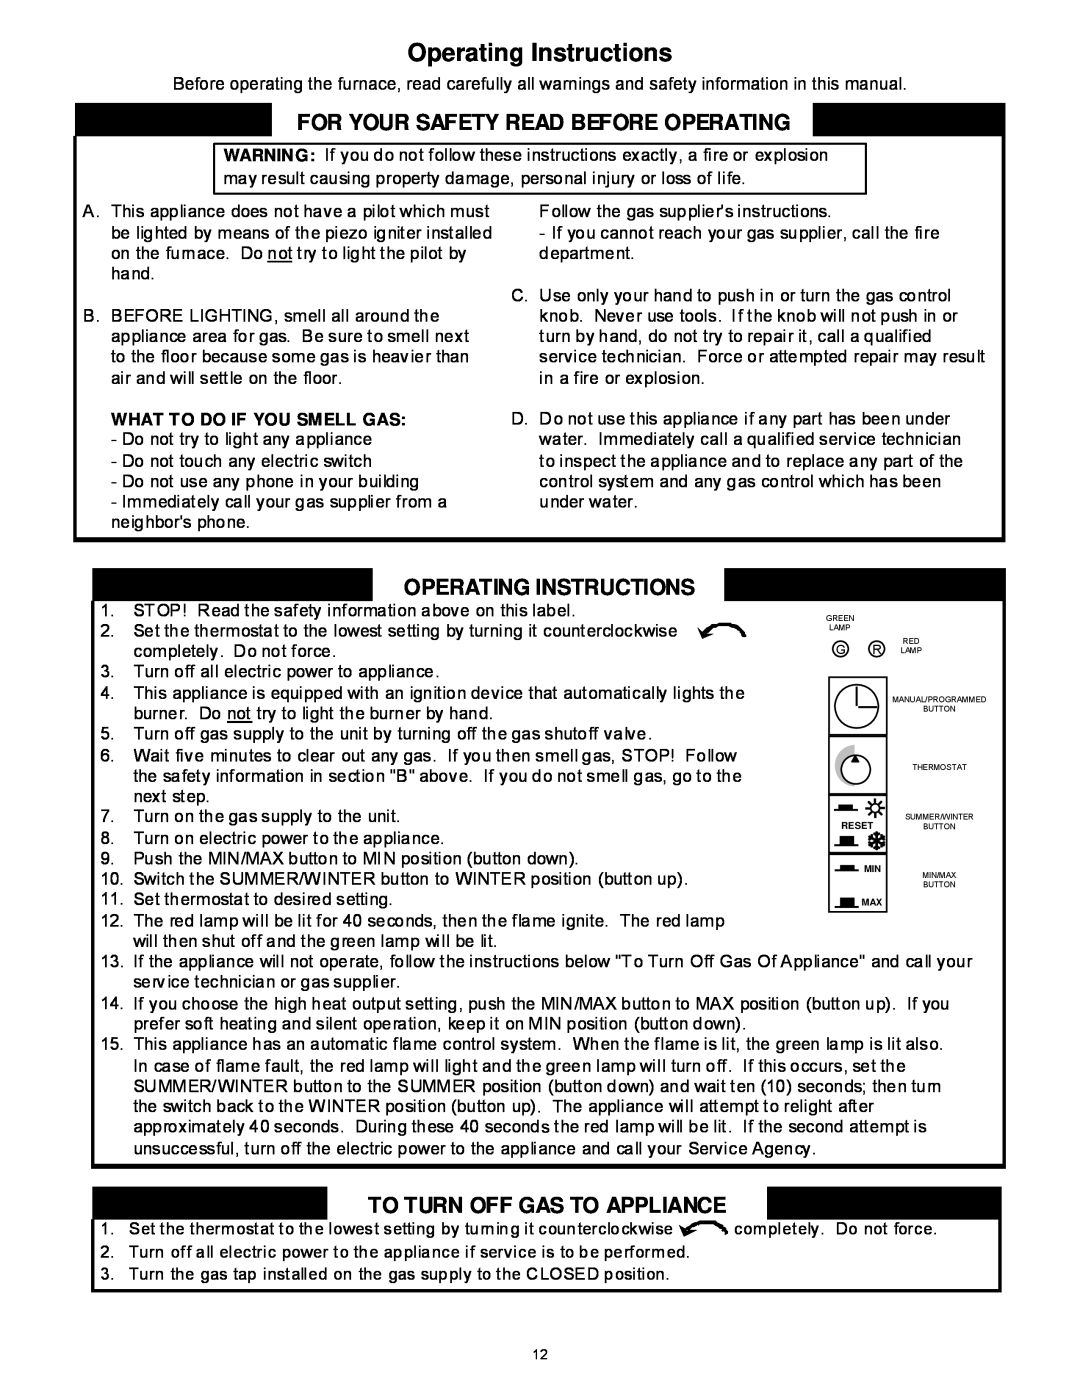 Williams 2903512, 2903511 Operating Instructions, For Your Safety Read Before Operating, To Turn Off Gas To Appliance 